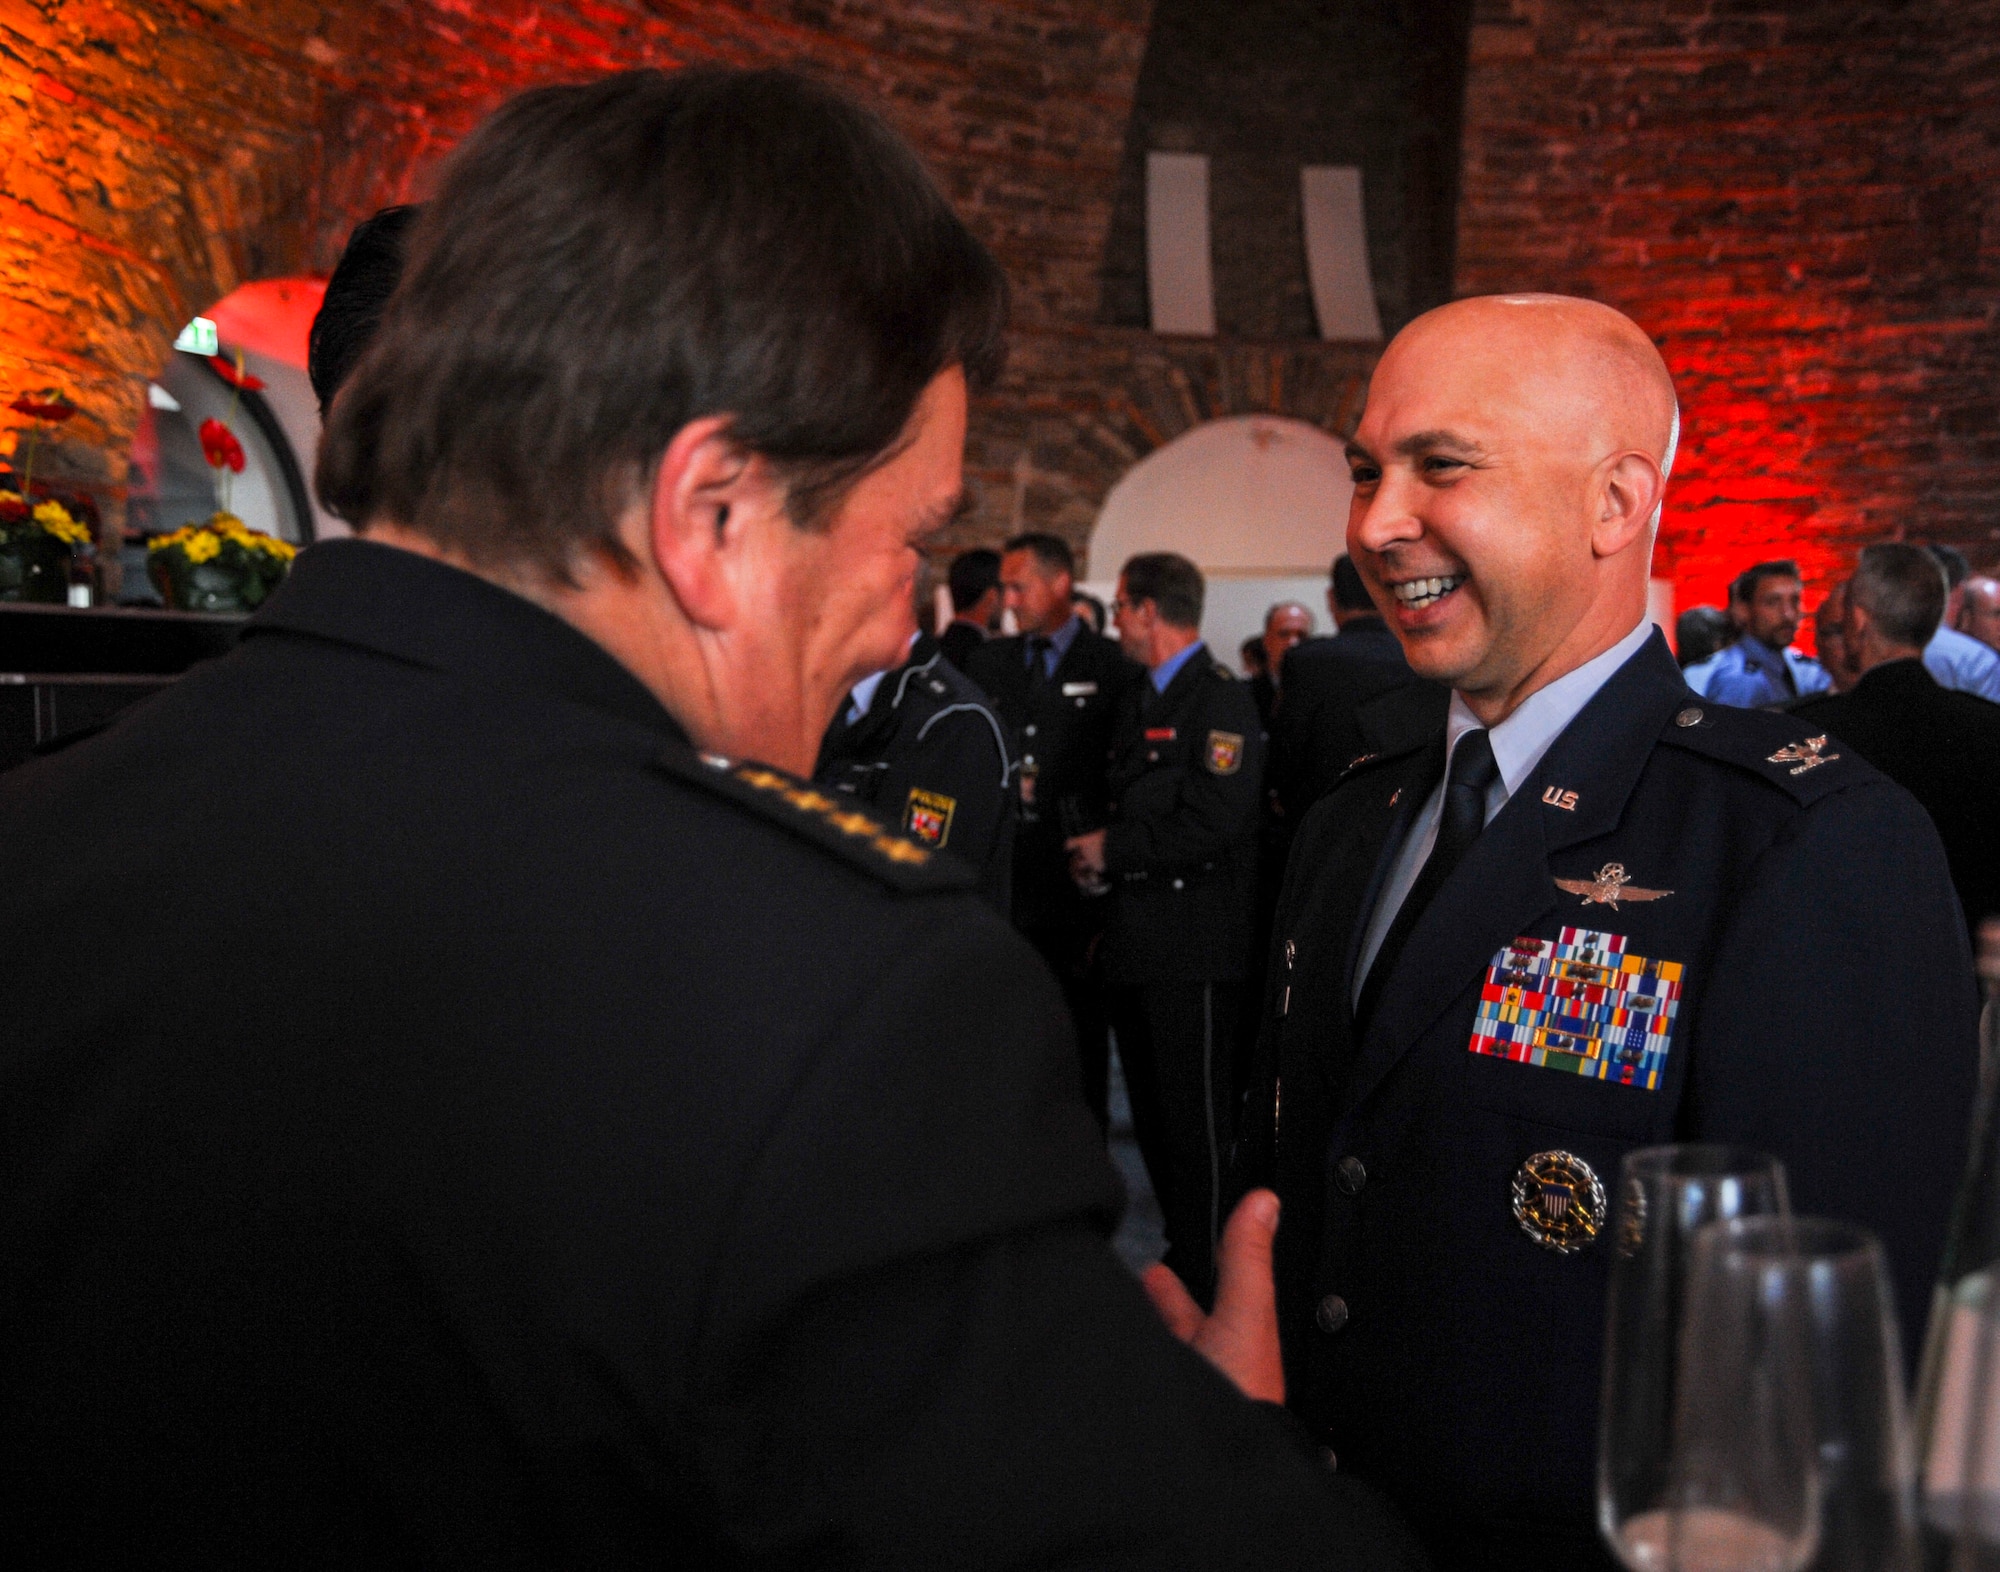 U.S. Air Force Col. Curtis G. Juell, right, 86th Mission Support Group commander, speaks with a German police officer at the Rhineland-Palatinate Polizei’s 70th year anniversary celebration in Koblenz, Germany, May 20, 2017. Galbraith and other members of the Kaiserslautern Military Community were invited to the celebration as the Polizei often work alongside U.S. Air Force and Army security police. (U.S. Air Force photo by Staff Sgt. Timothy Moore)